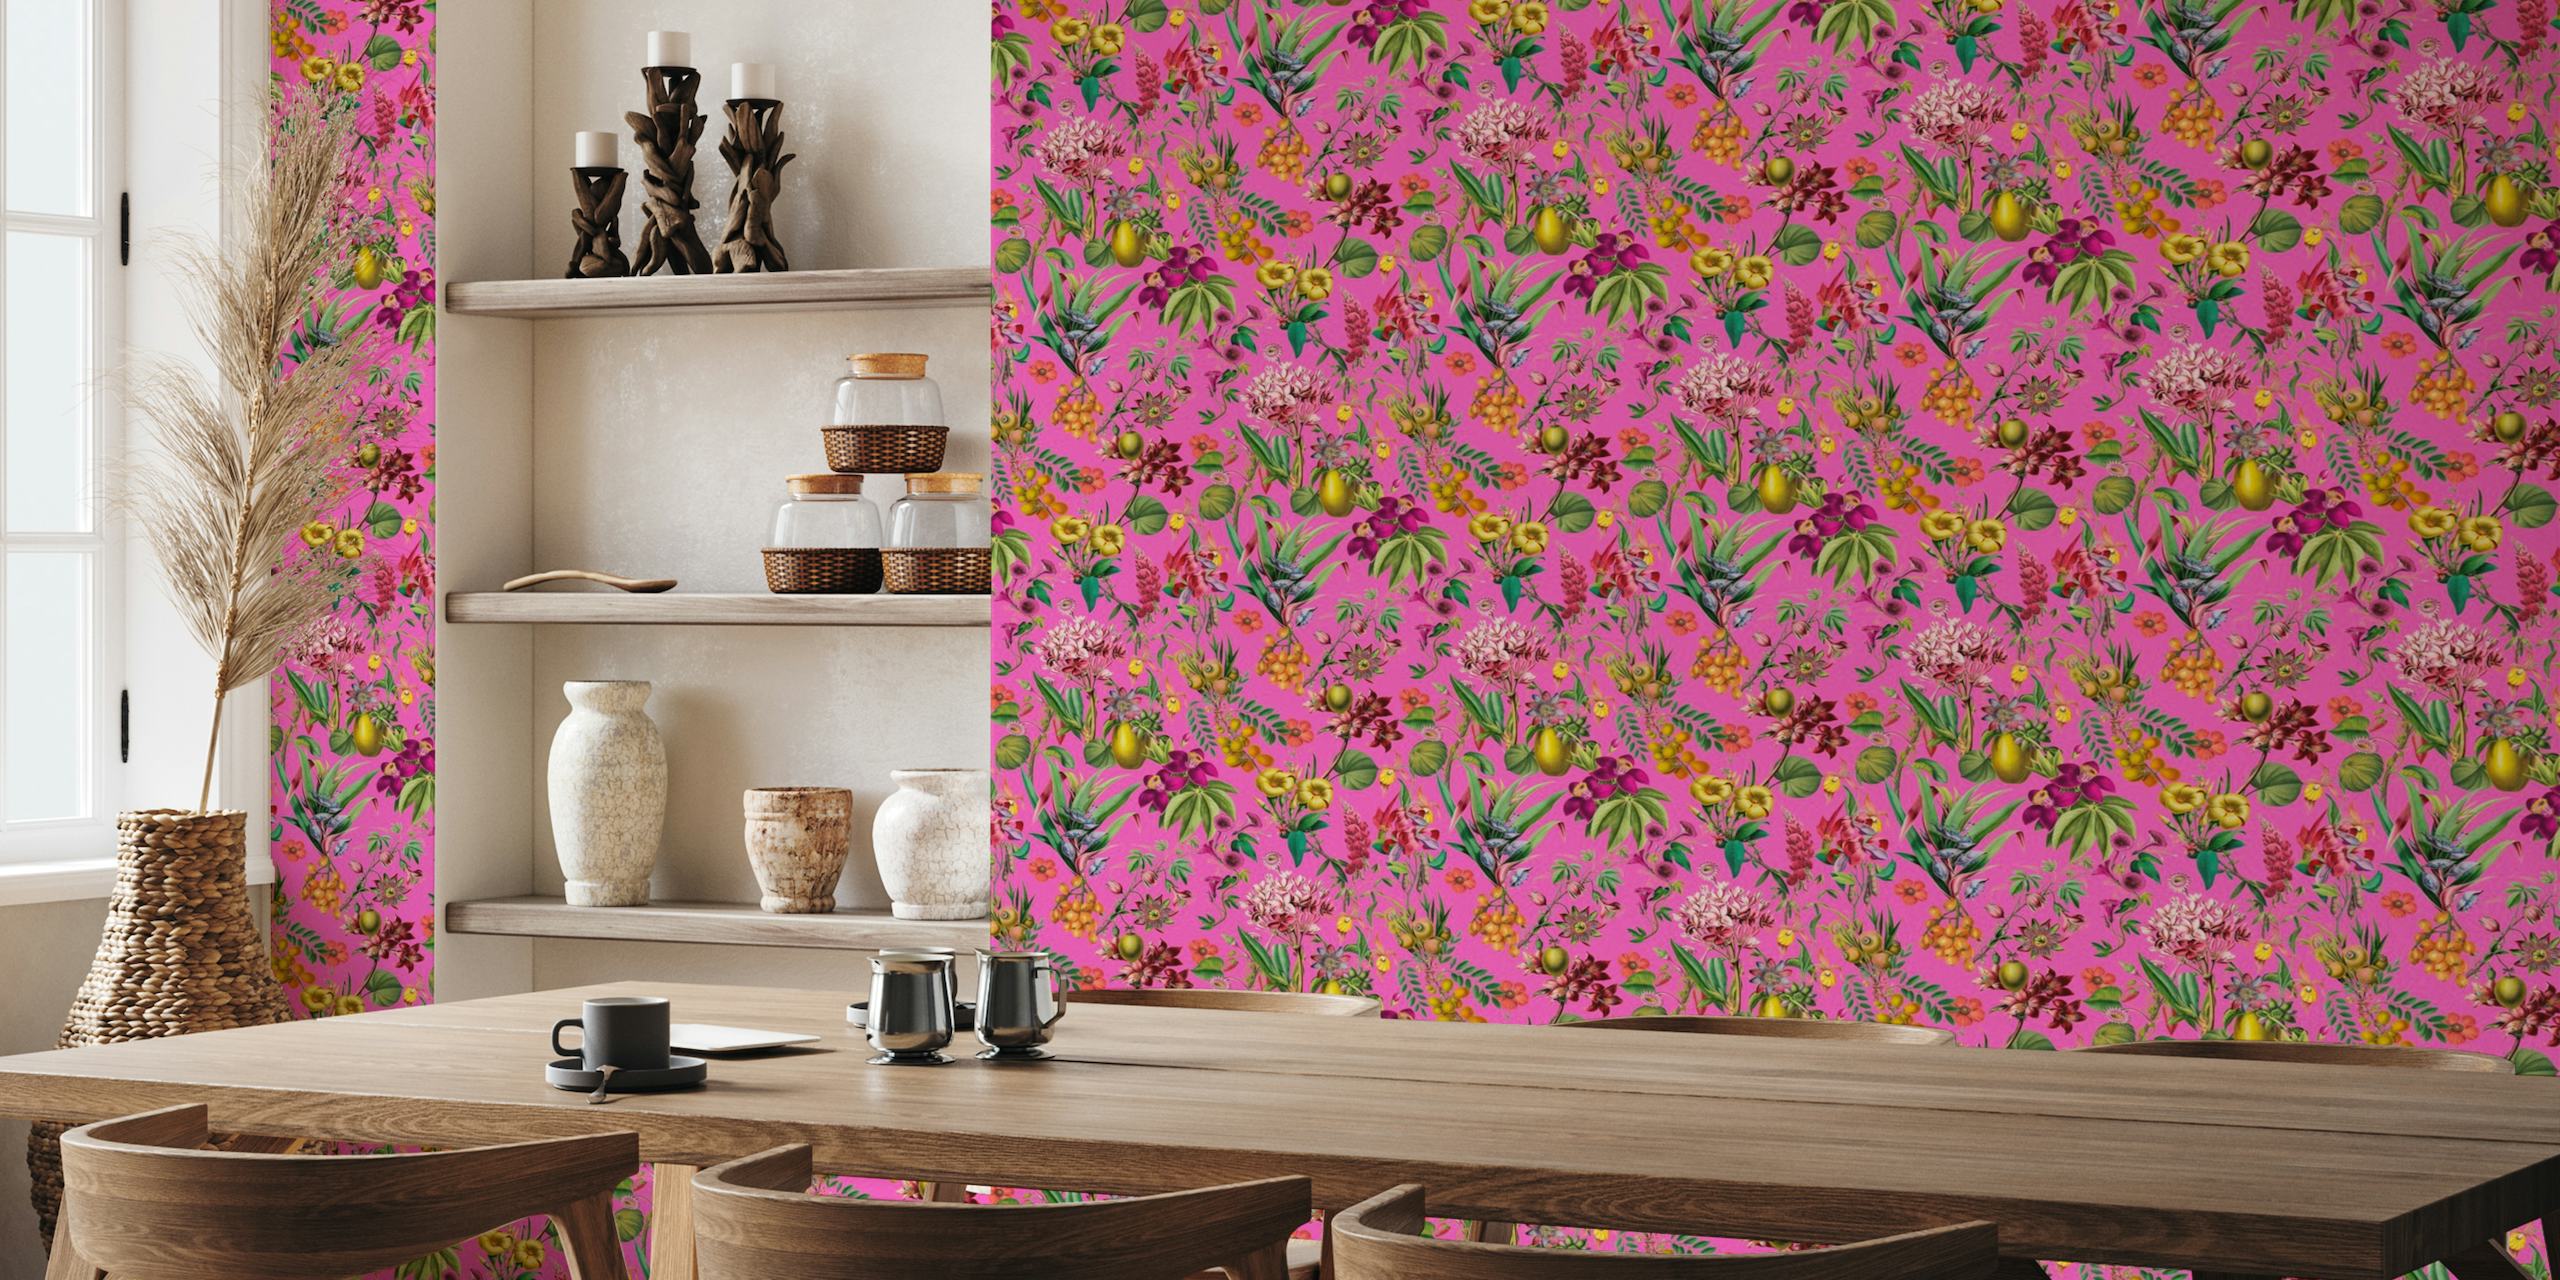 Tropical Jungle Flower And Fruit Garden Pattern On Pink papel pintado